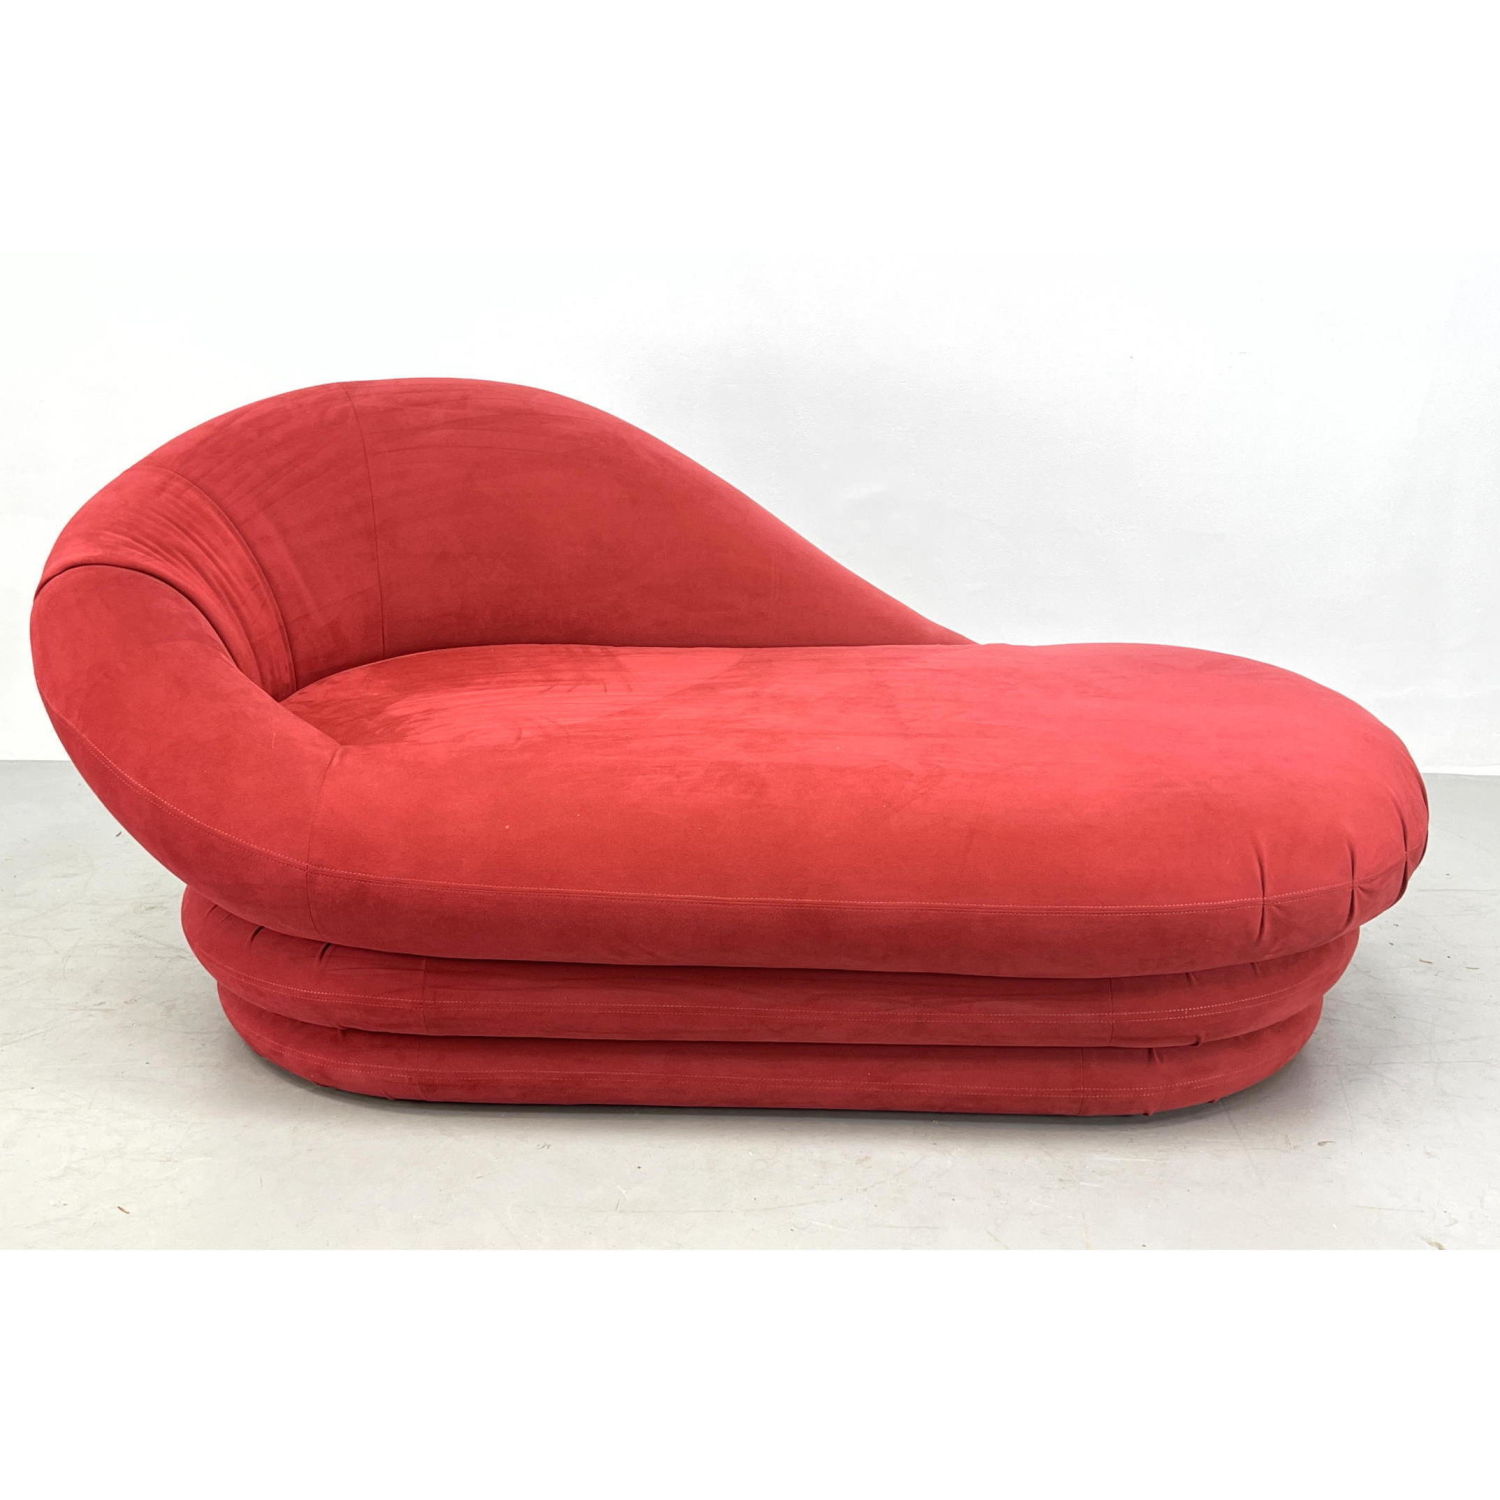 CARSON'S Red Ultrasuede Chaise